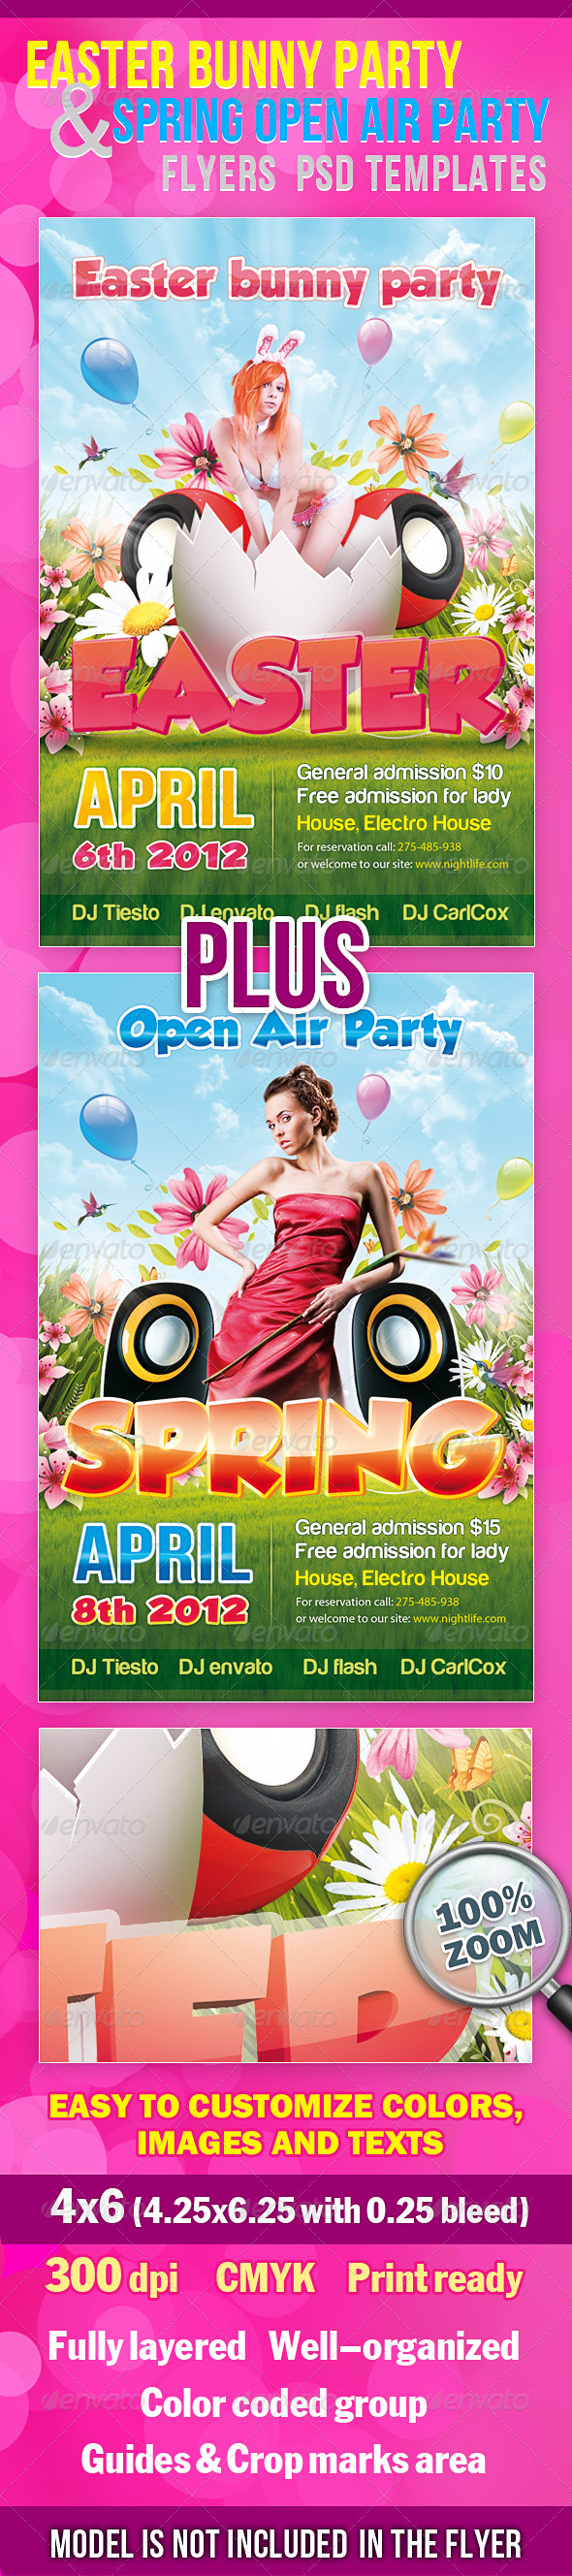 Easter Party Flyers Templates Free